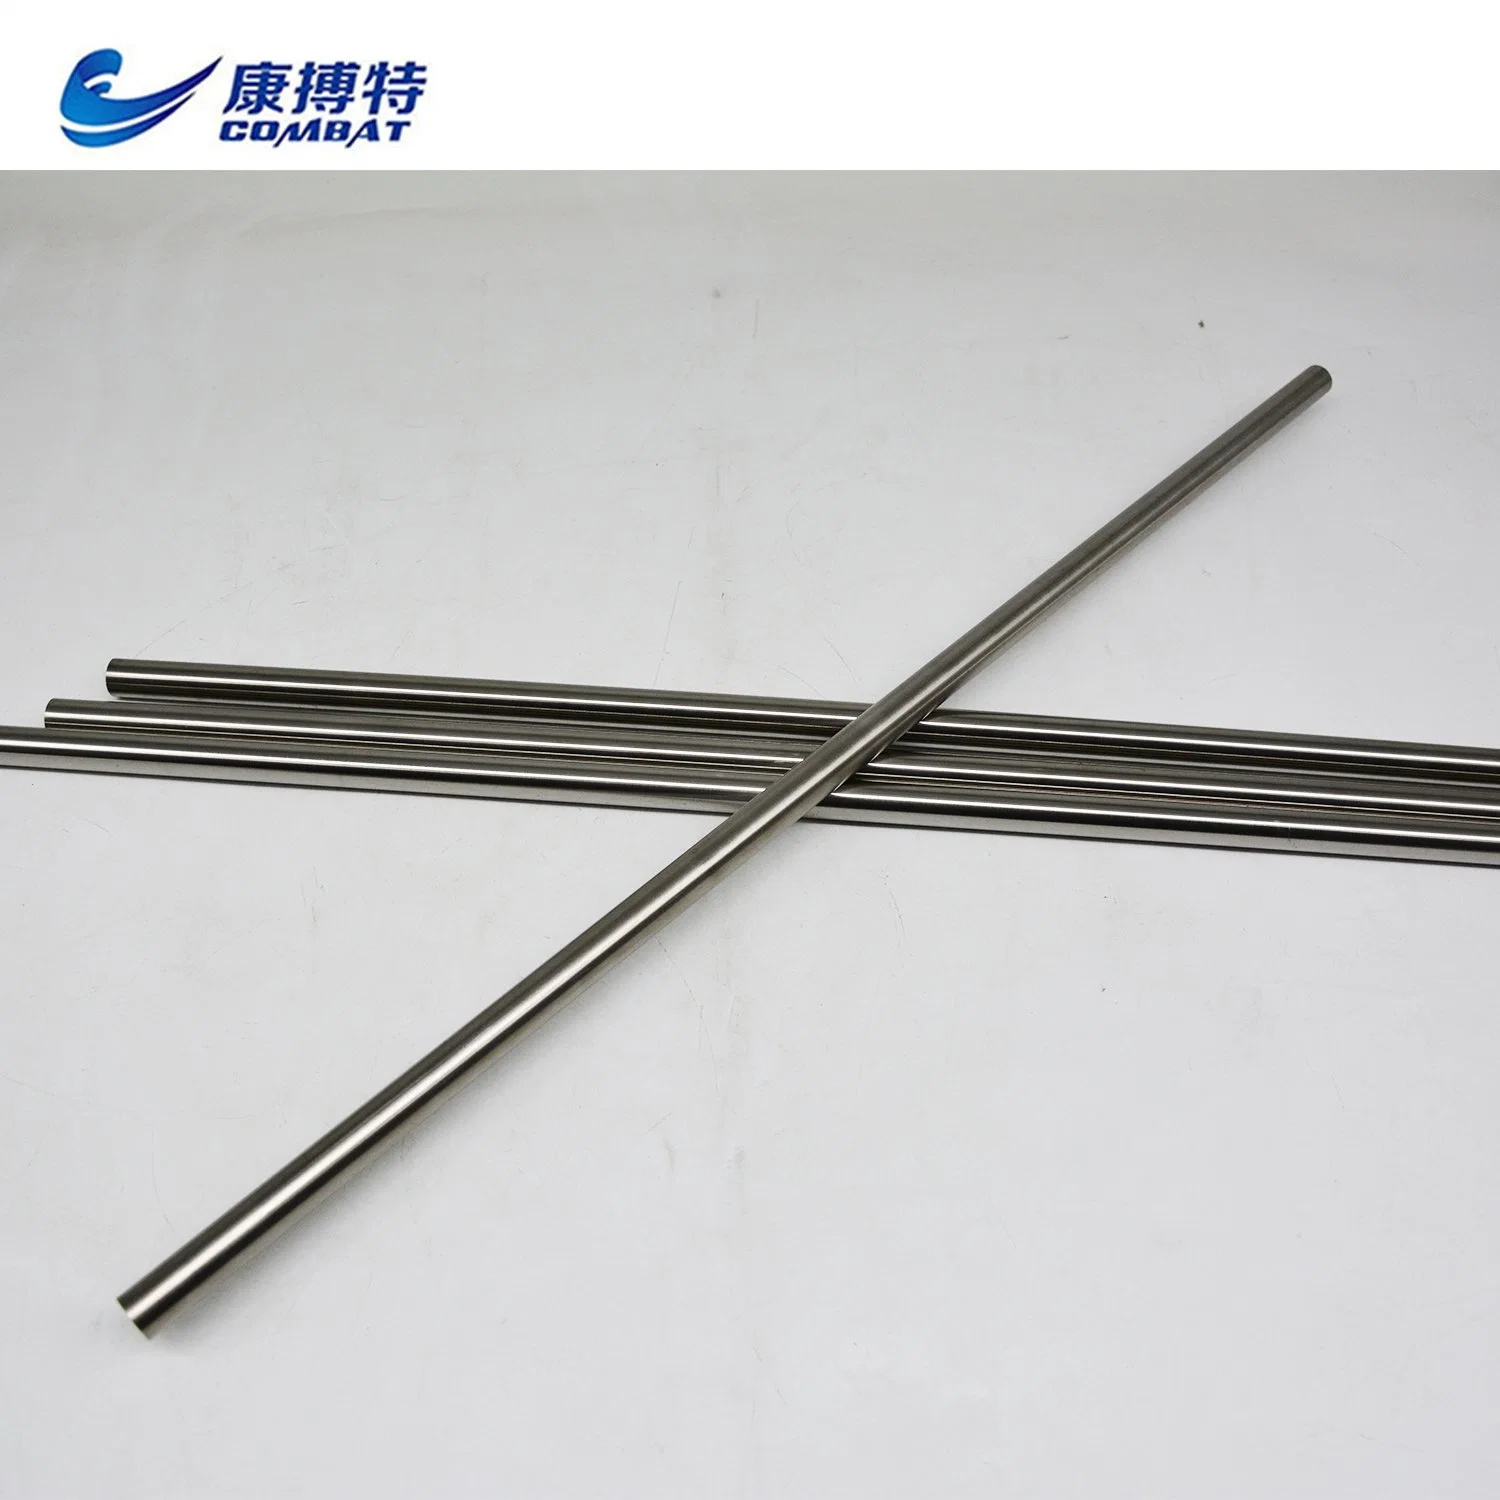 Global Seamless/Forged/Rolled Luoyang Combat Wooden Package Henan Alloy Titanium Tube